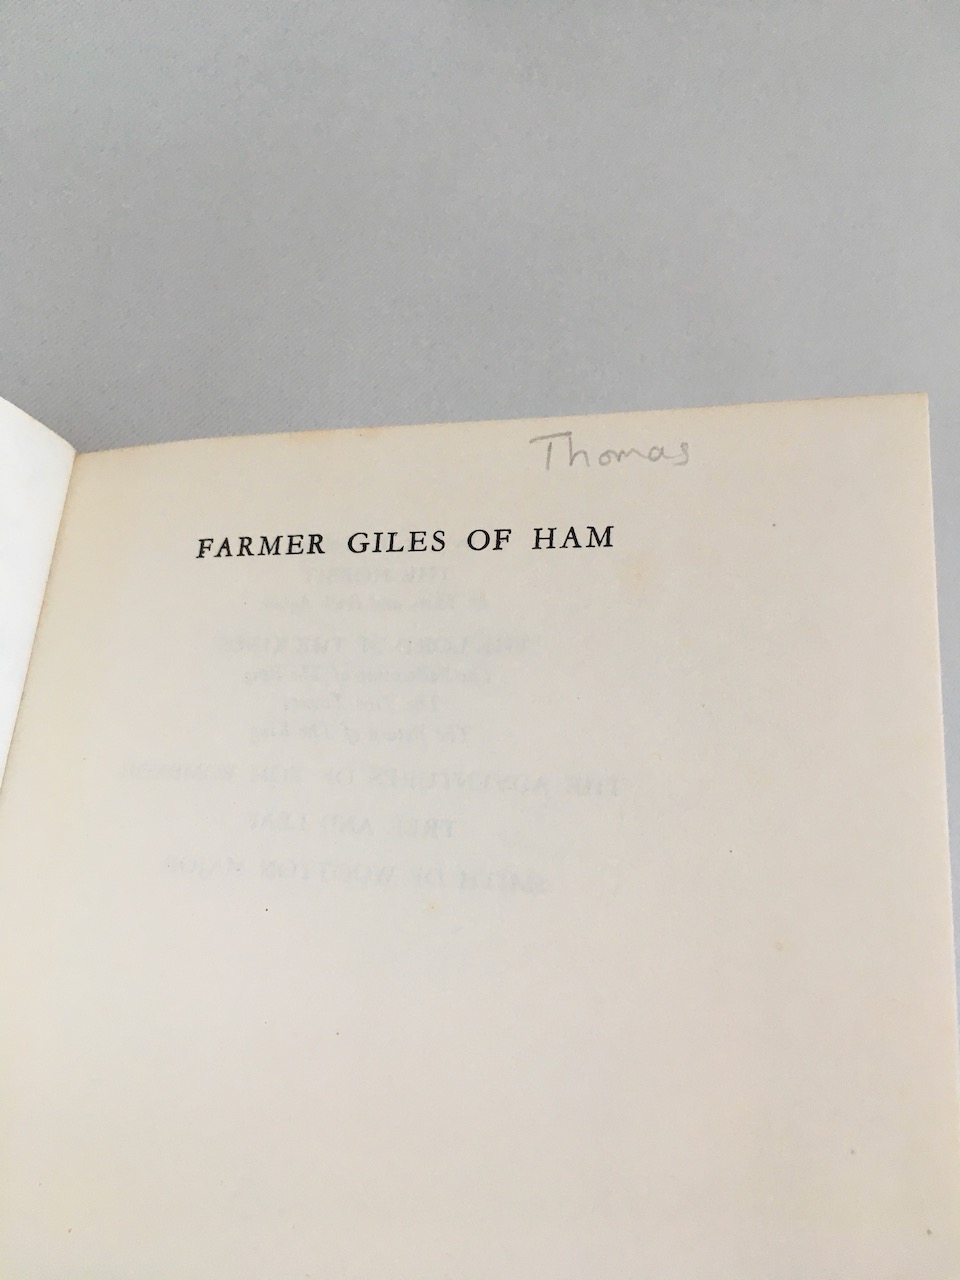 
Farmer Giles of Ham, The Rise and Wonderful Adventures of Farmer Giles, 7th impression from 1970 13